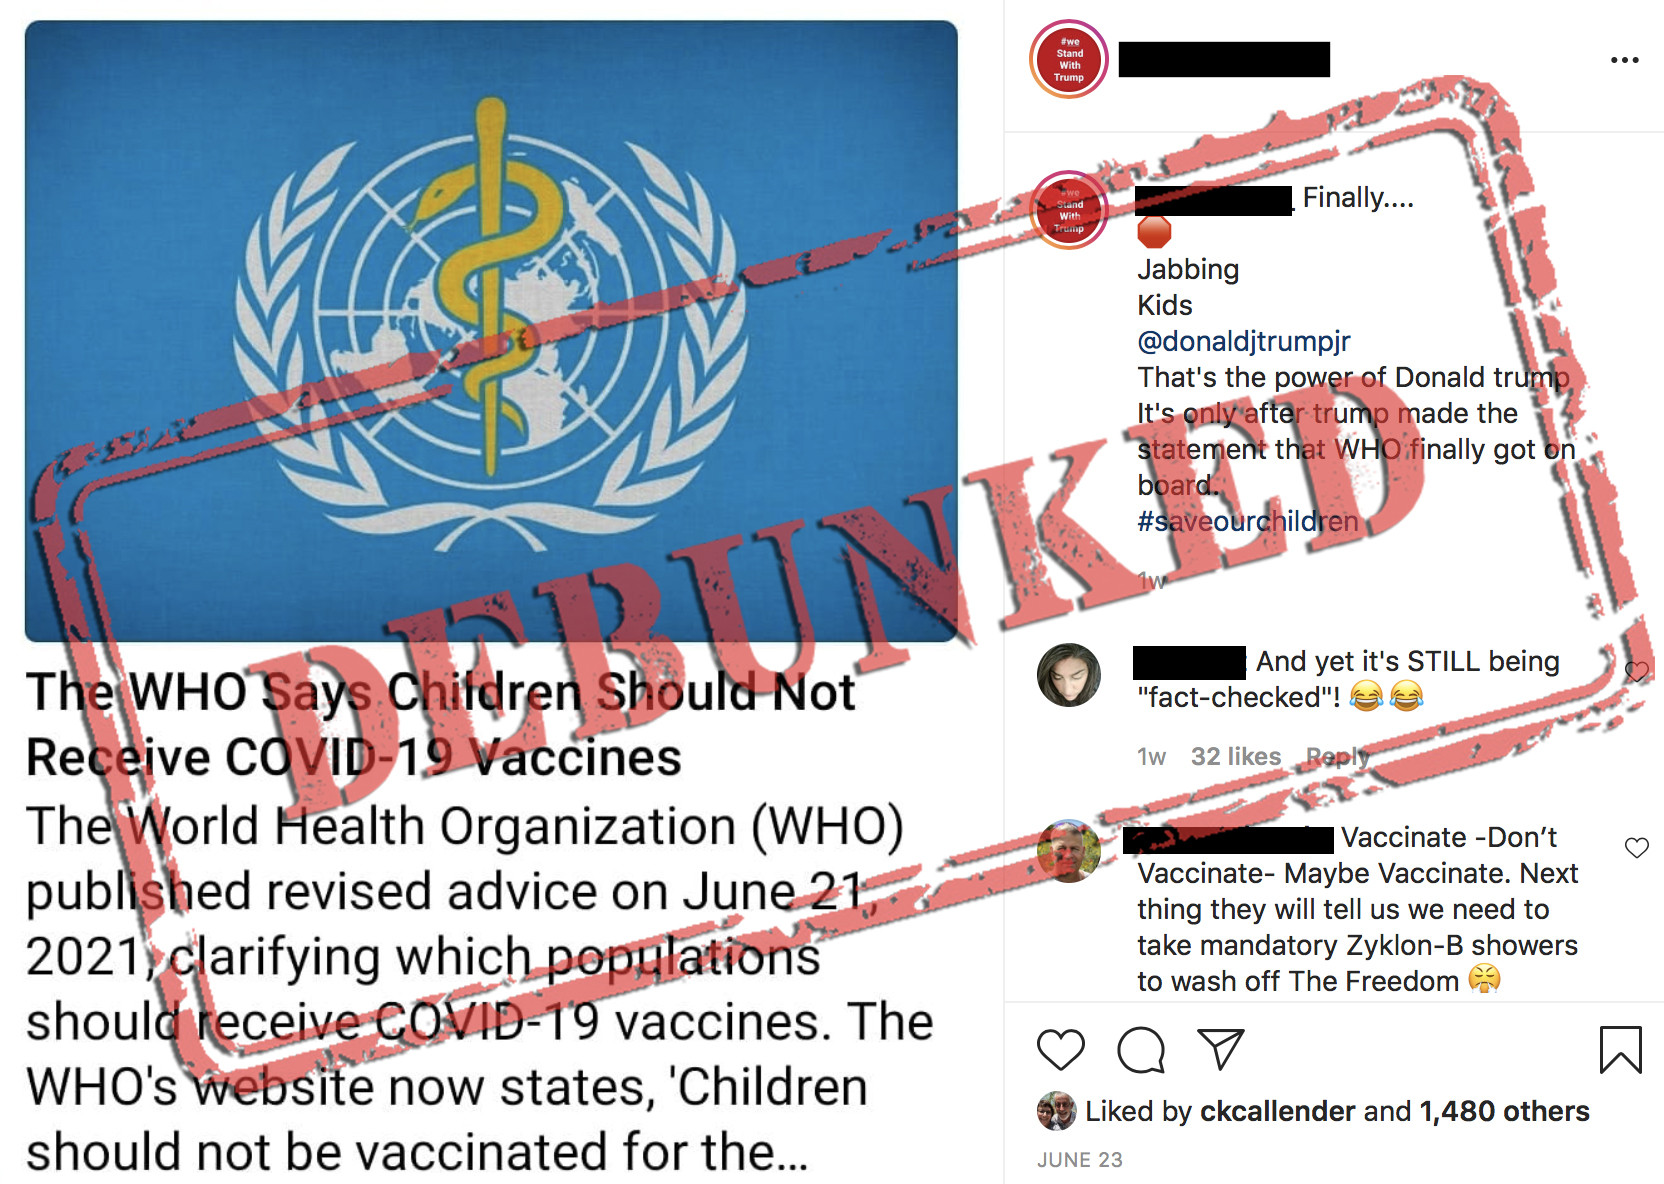 An instagram post containing the logo for the WHO with a large "debunked" overaly